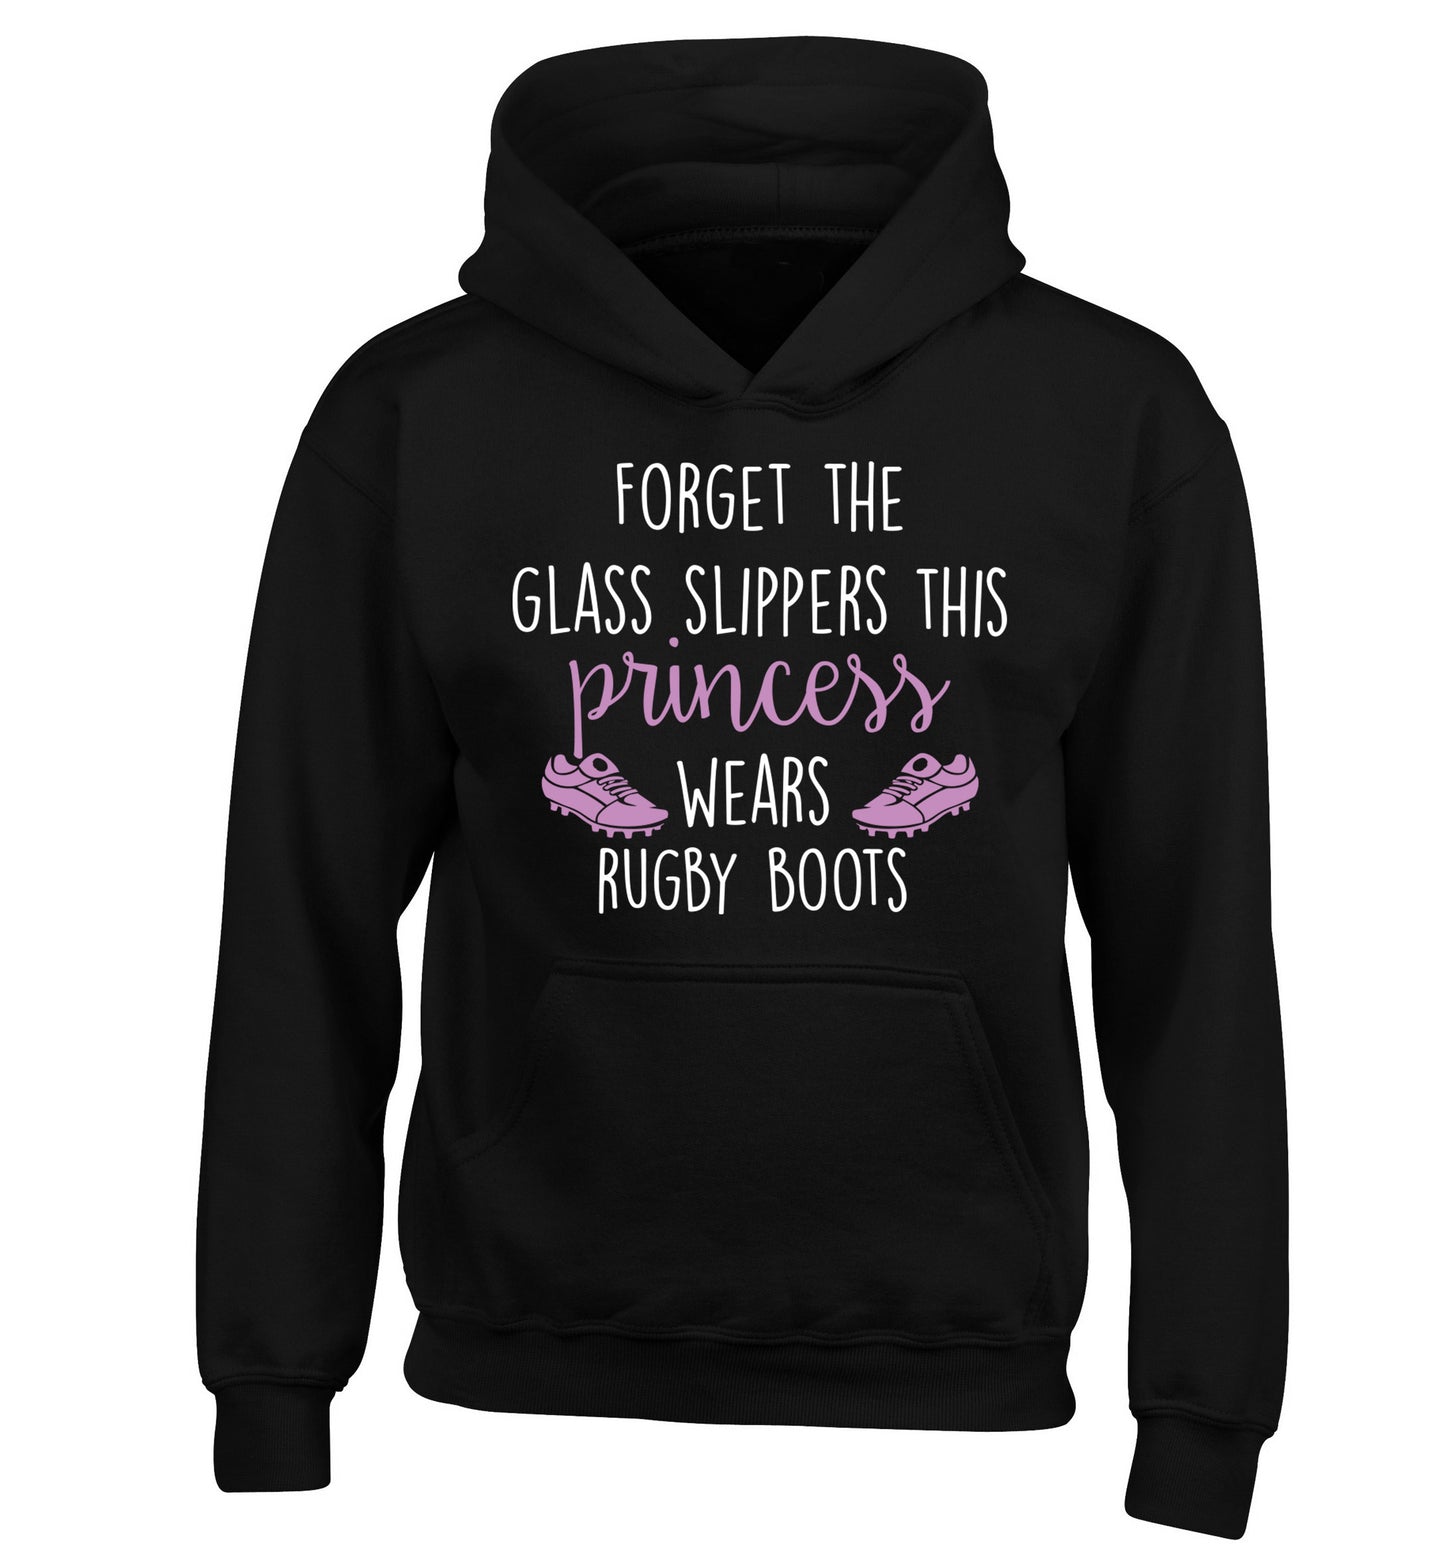 Forget the glass slippers this princess wears rugby boots children's black hoodie 12-14 Years